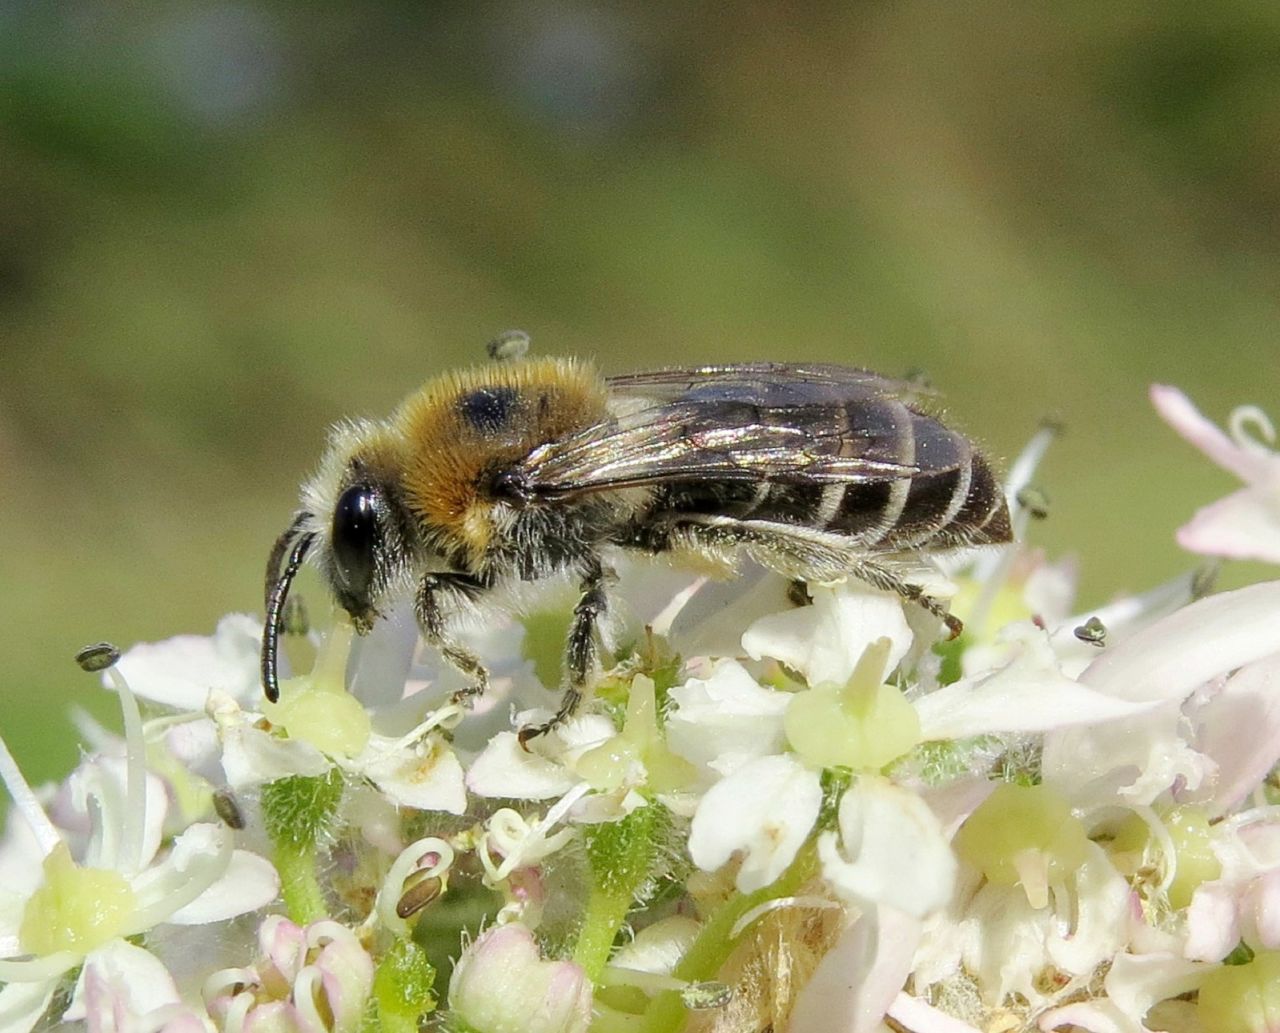 The B-lines network aims for each wildflower-rich stepping stone to be no further than 300 meters apart from the next. This is the average commuting distance of a solitary bee, such as the northern collete pictured.